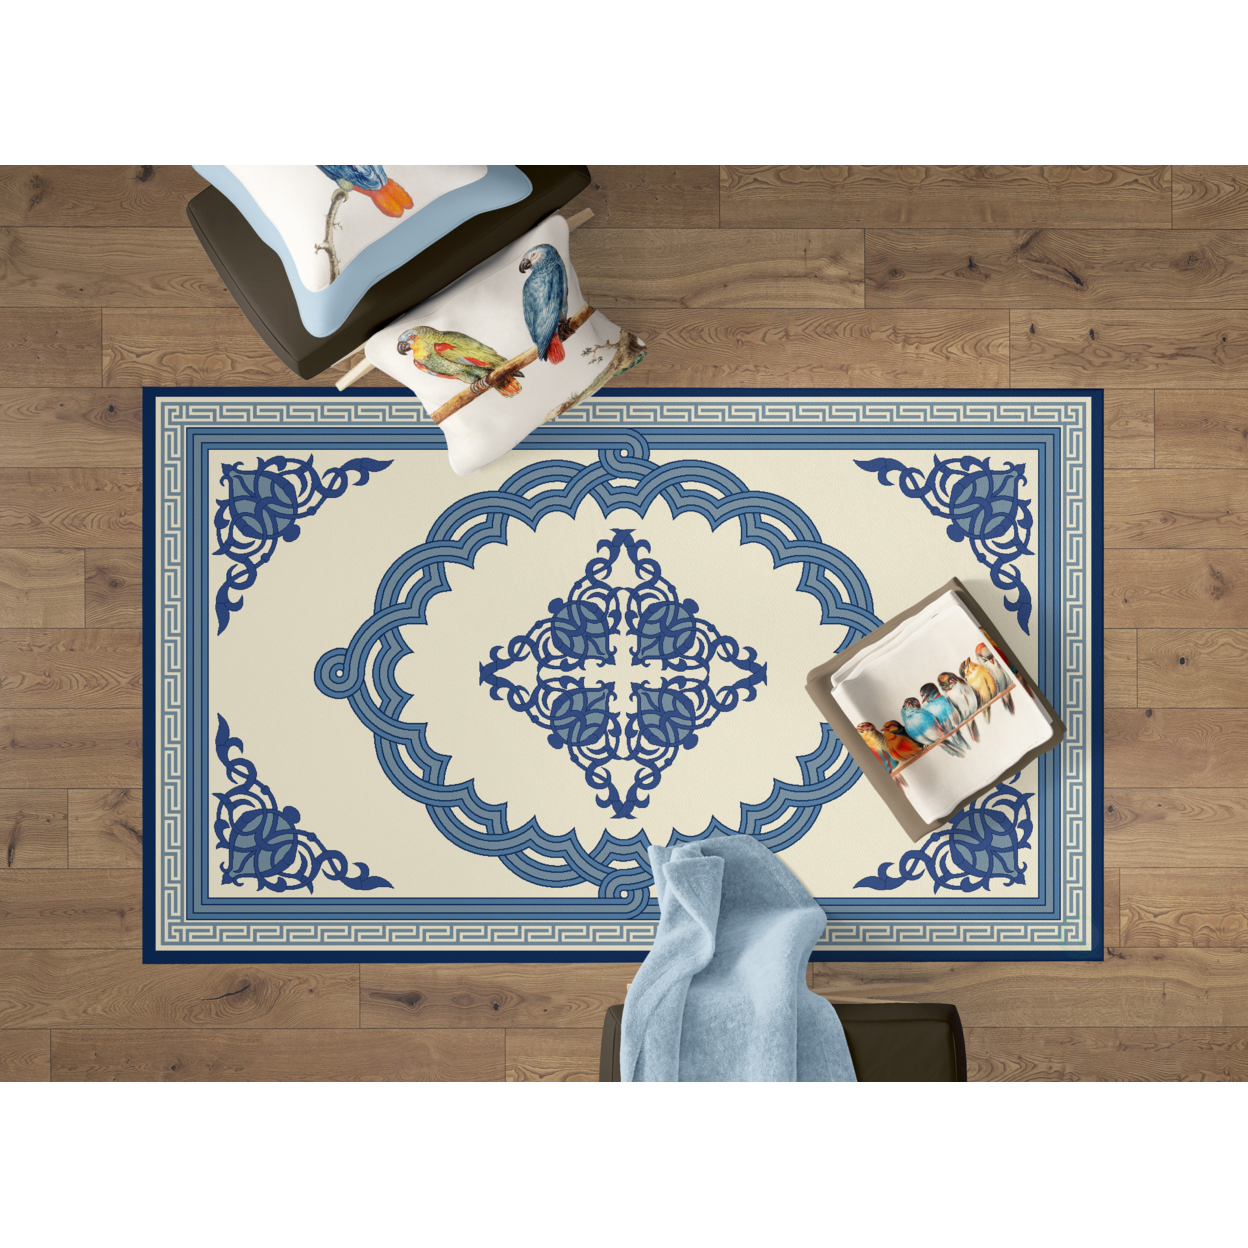 Deerlux Transitional Living Room Area Rug With Nonslip Backing, Blue Medallion Pattern - 4 X 6